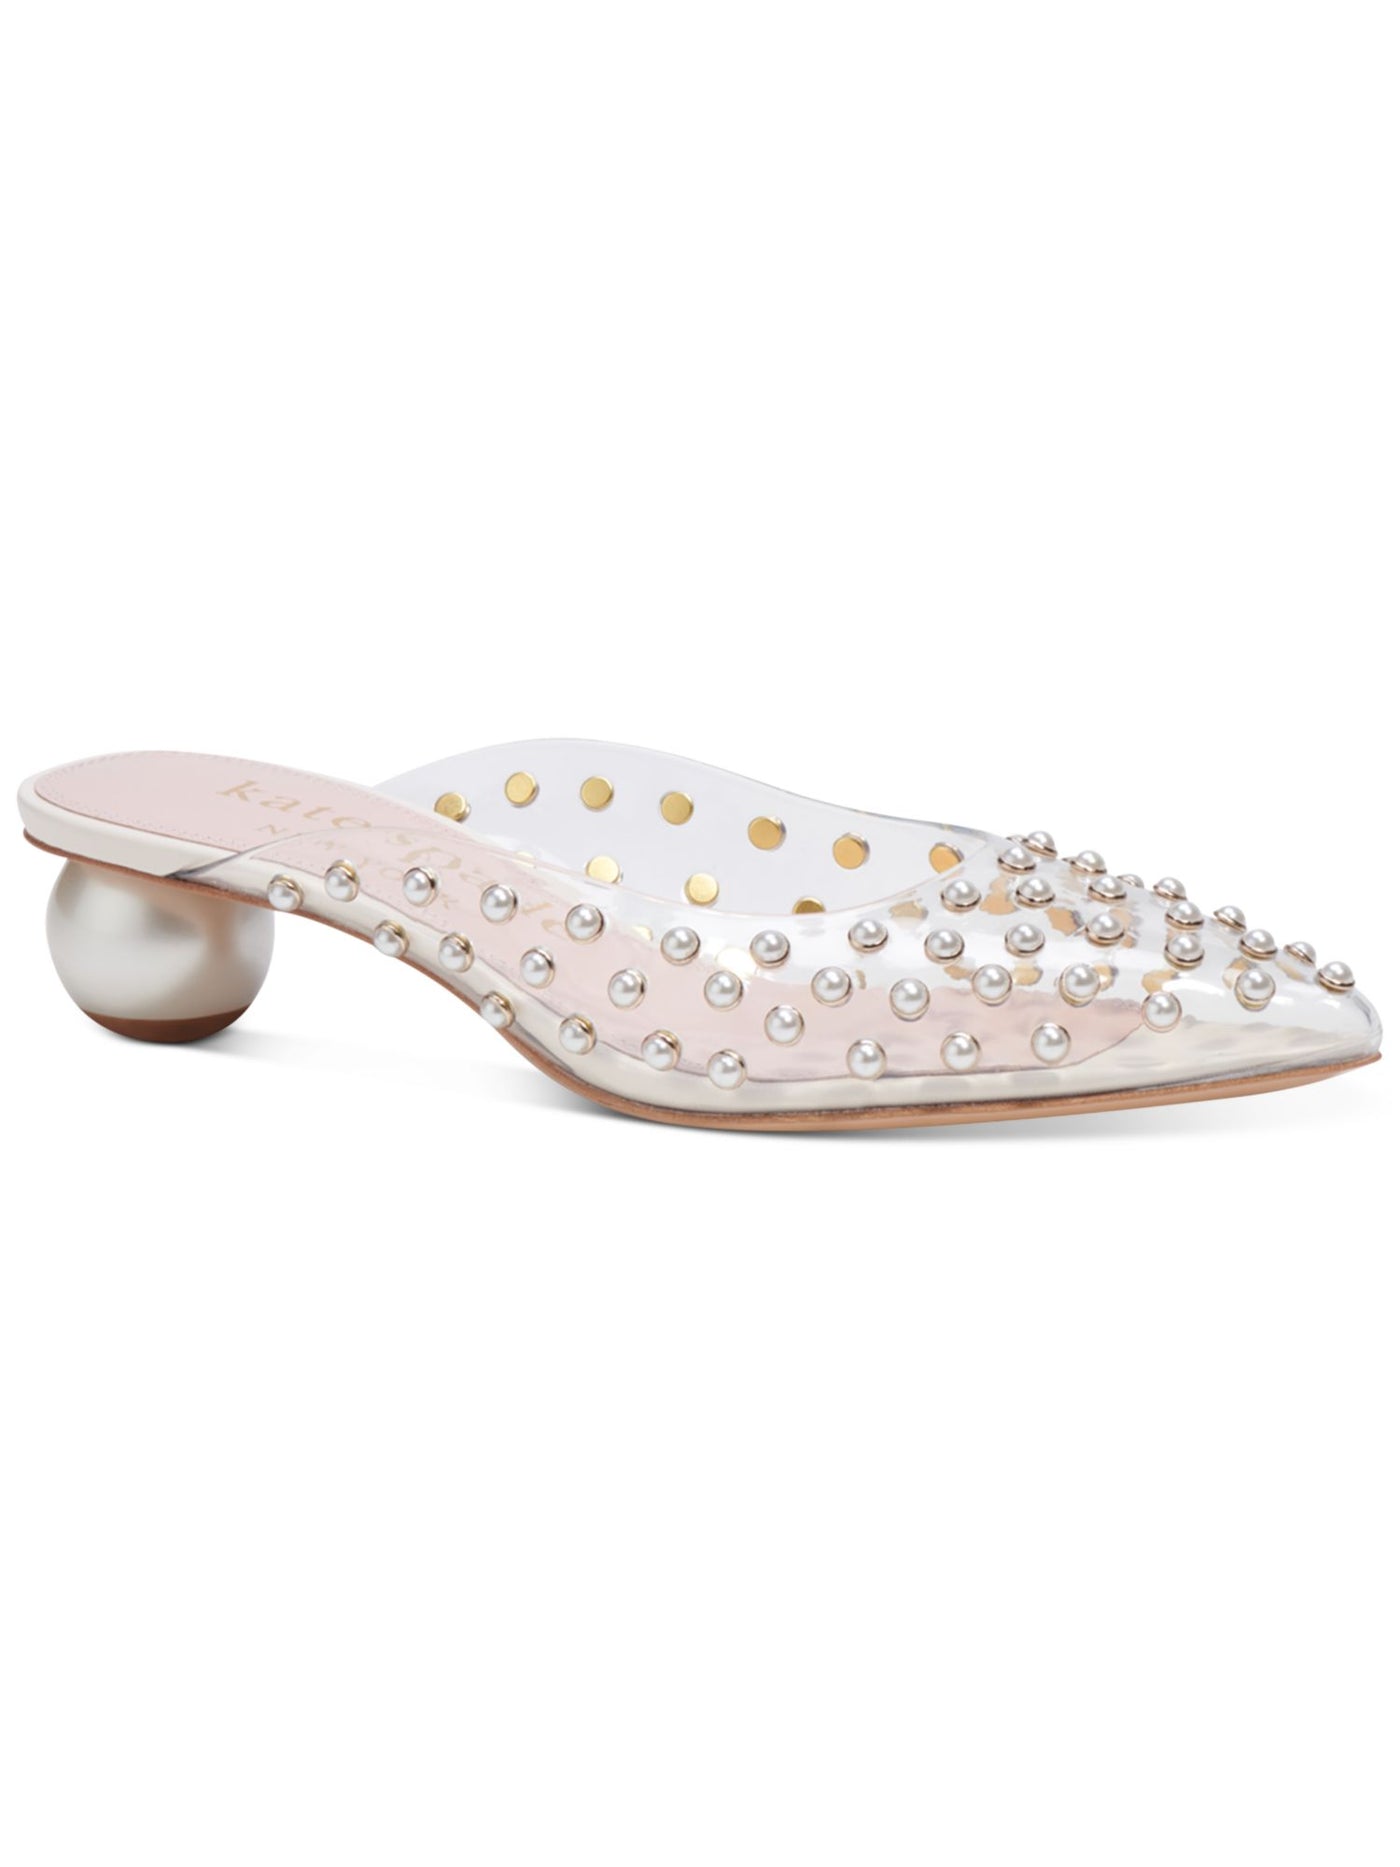 KATE SPADE NEW YORK Womens Clear Embellished Padded Honor Pointed Toe Slip On Flats Shoes 5.5 B